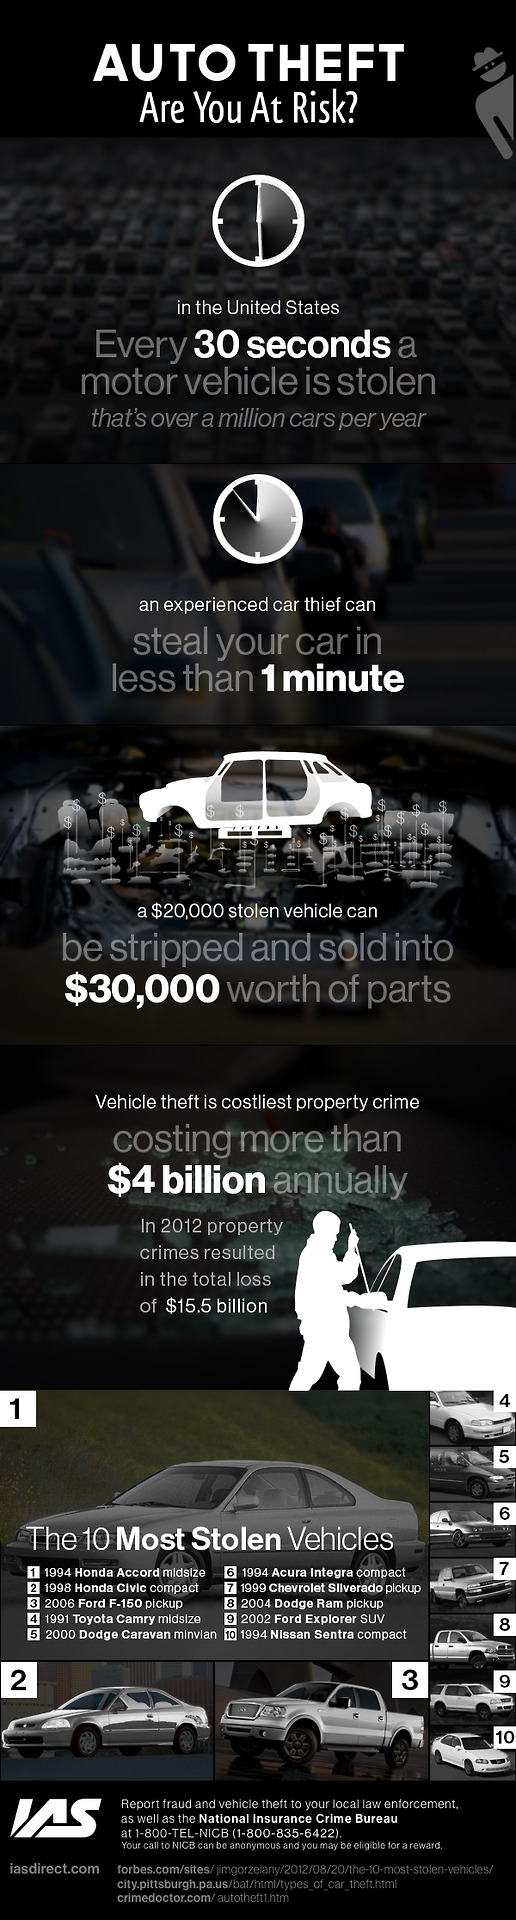 Auto Theft in the US: Are You At Risk?